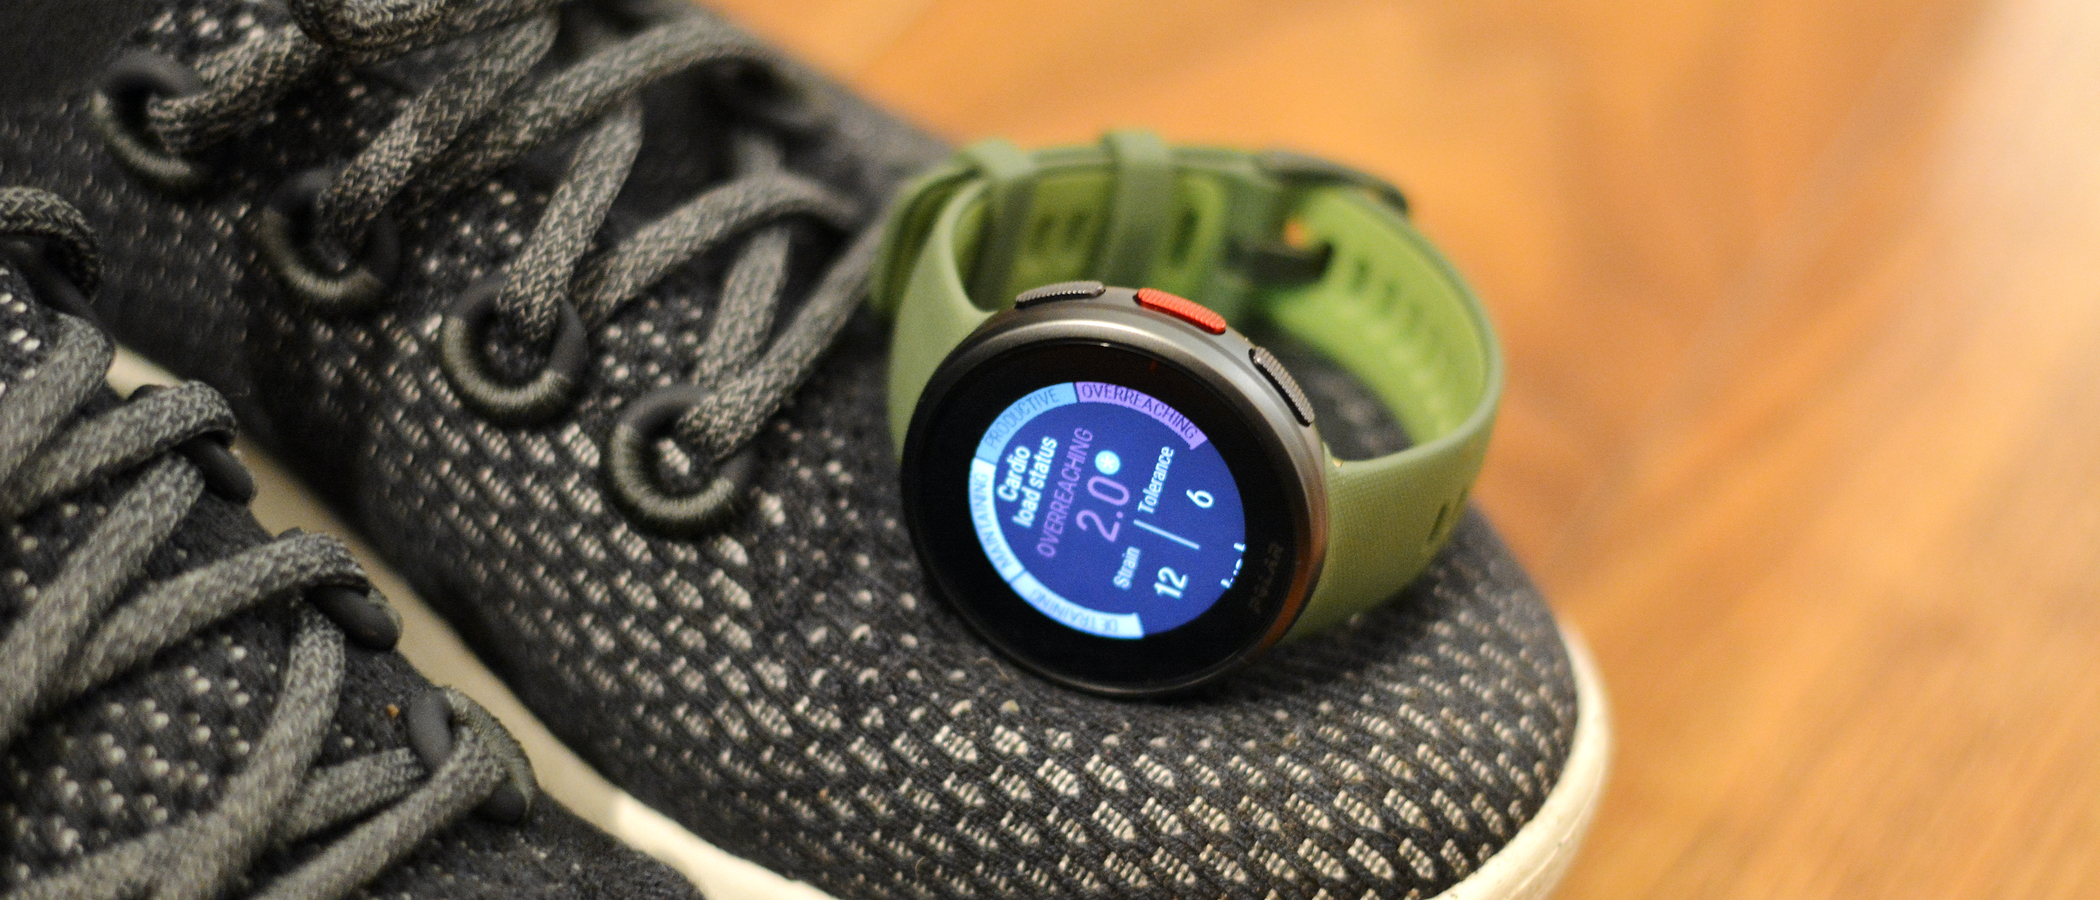 Polar Vantage V2 GPS Watch Review - Believe in the Run